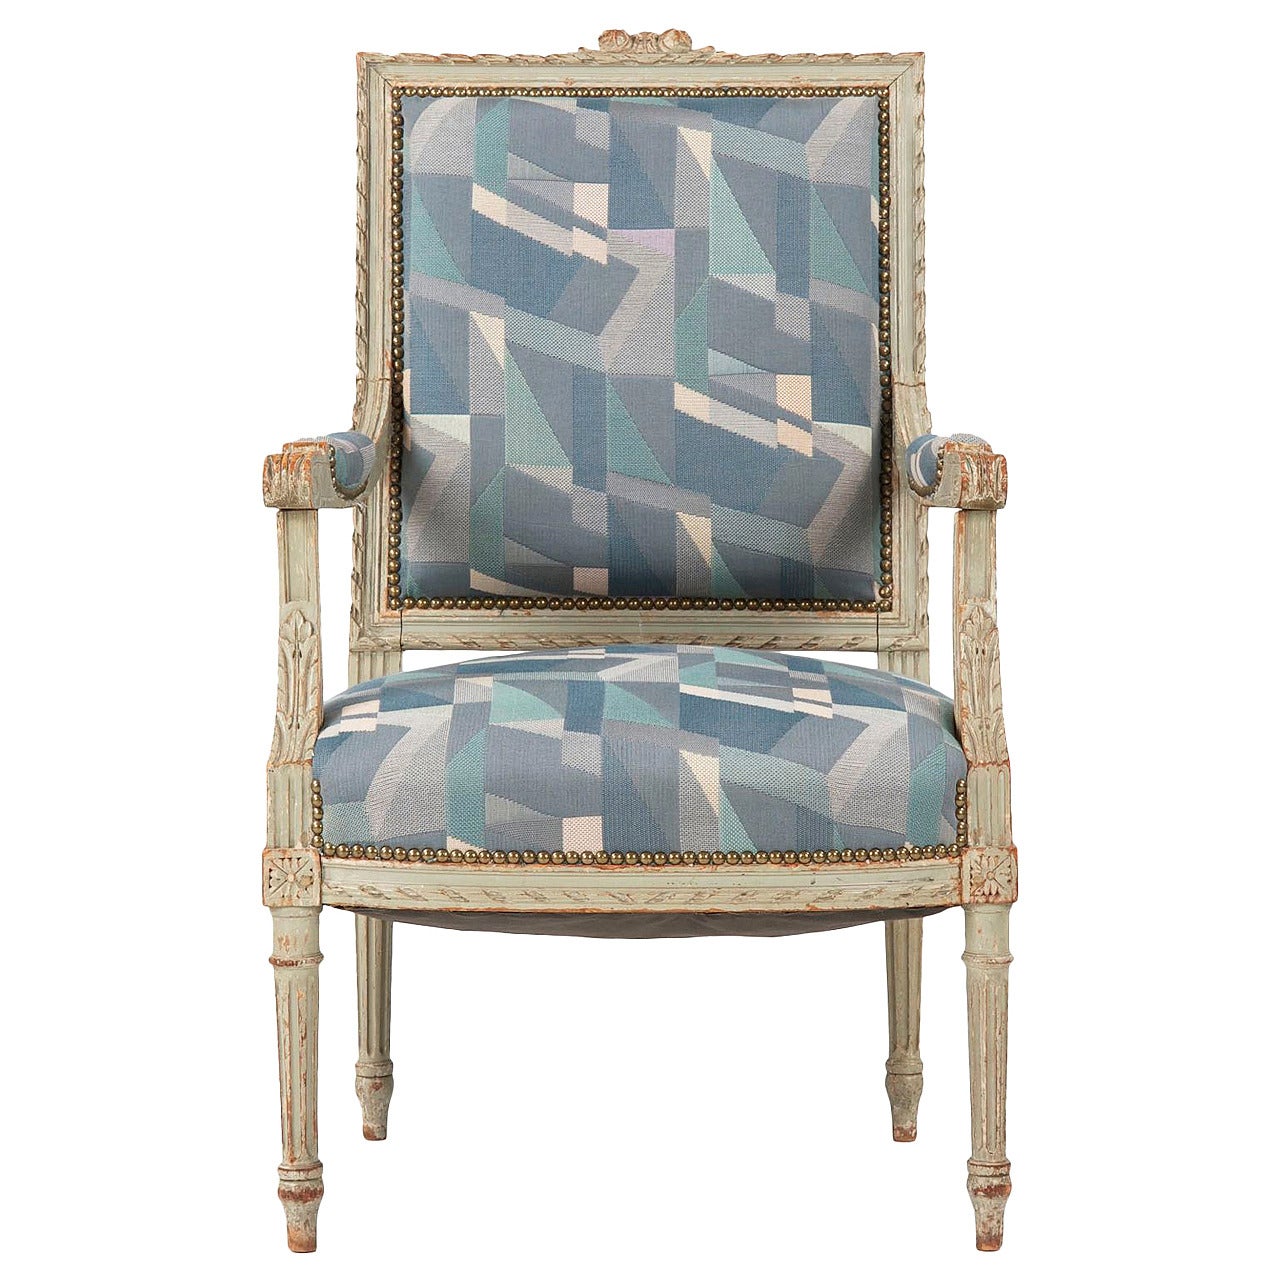 19th Century French Louis XVI Gray Painted Antique Fauteuil Armchair